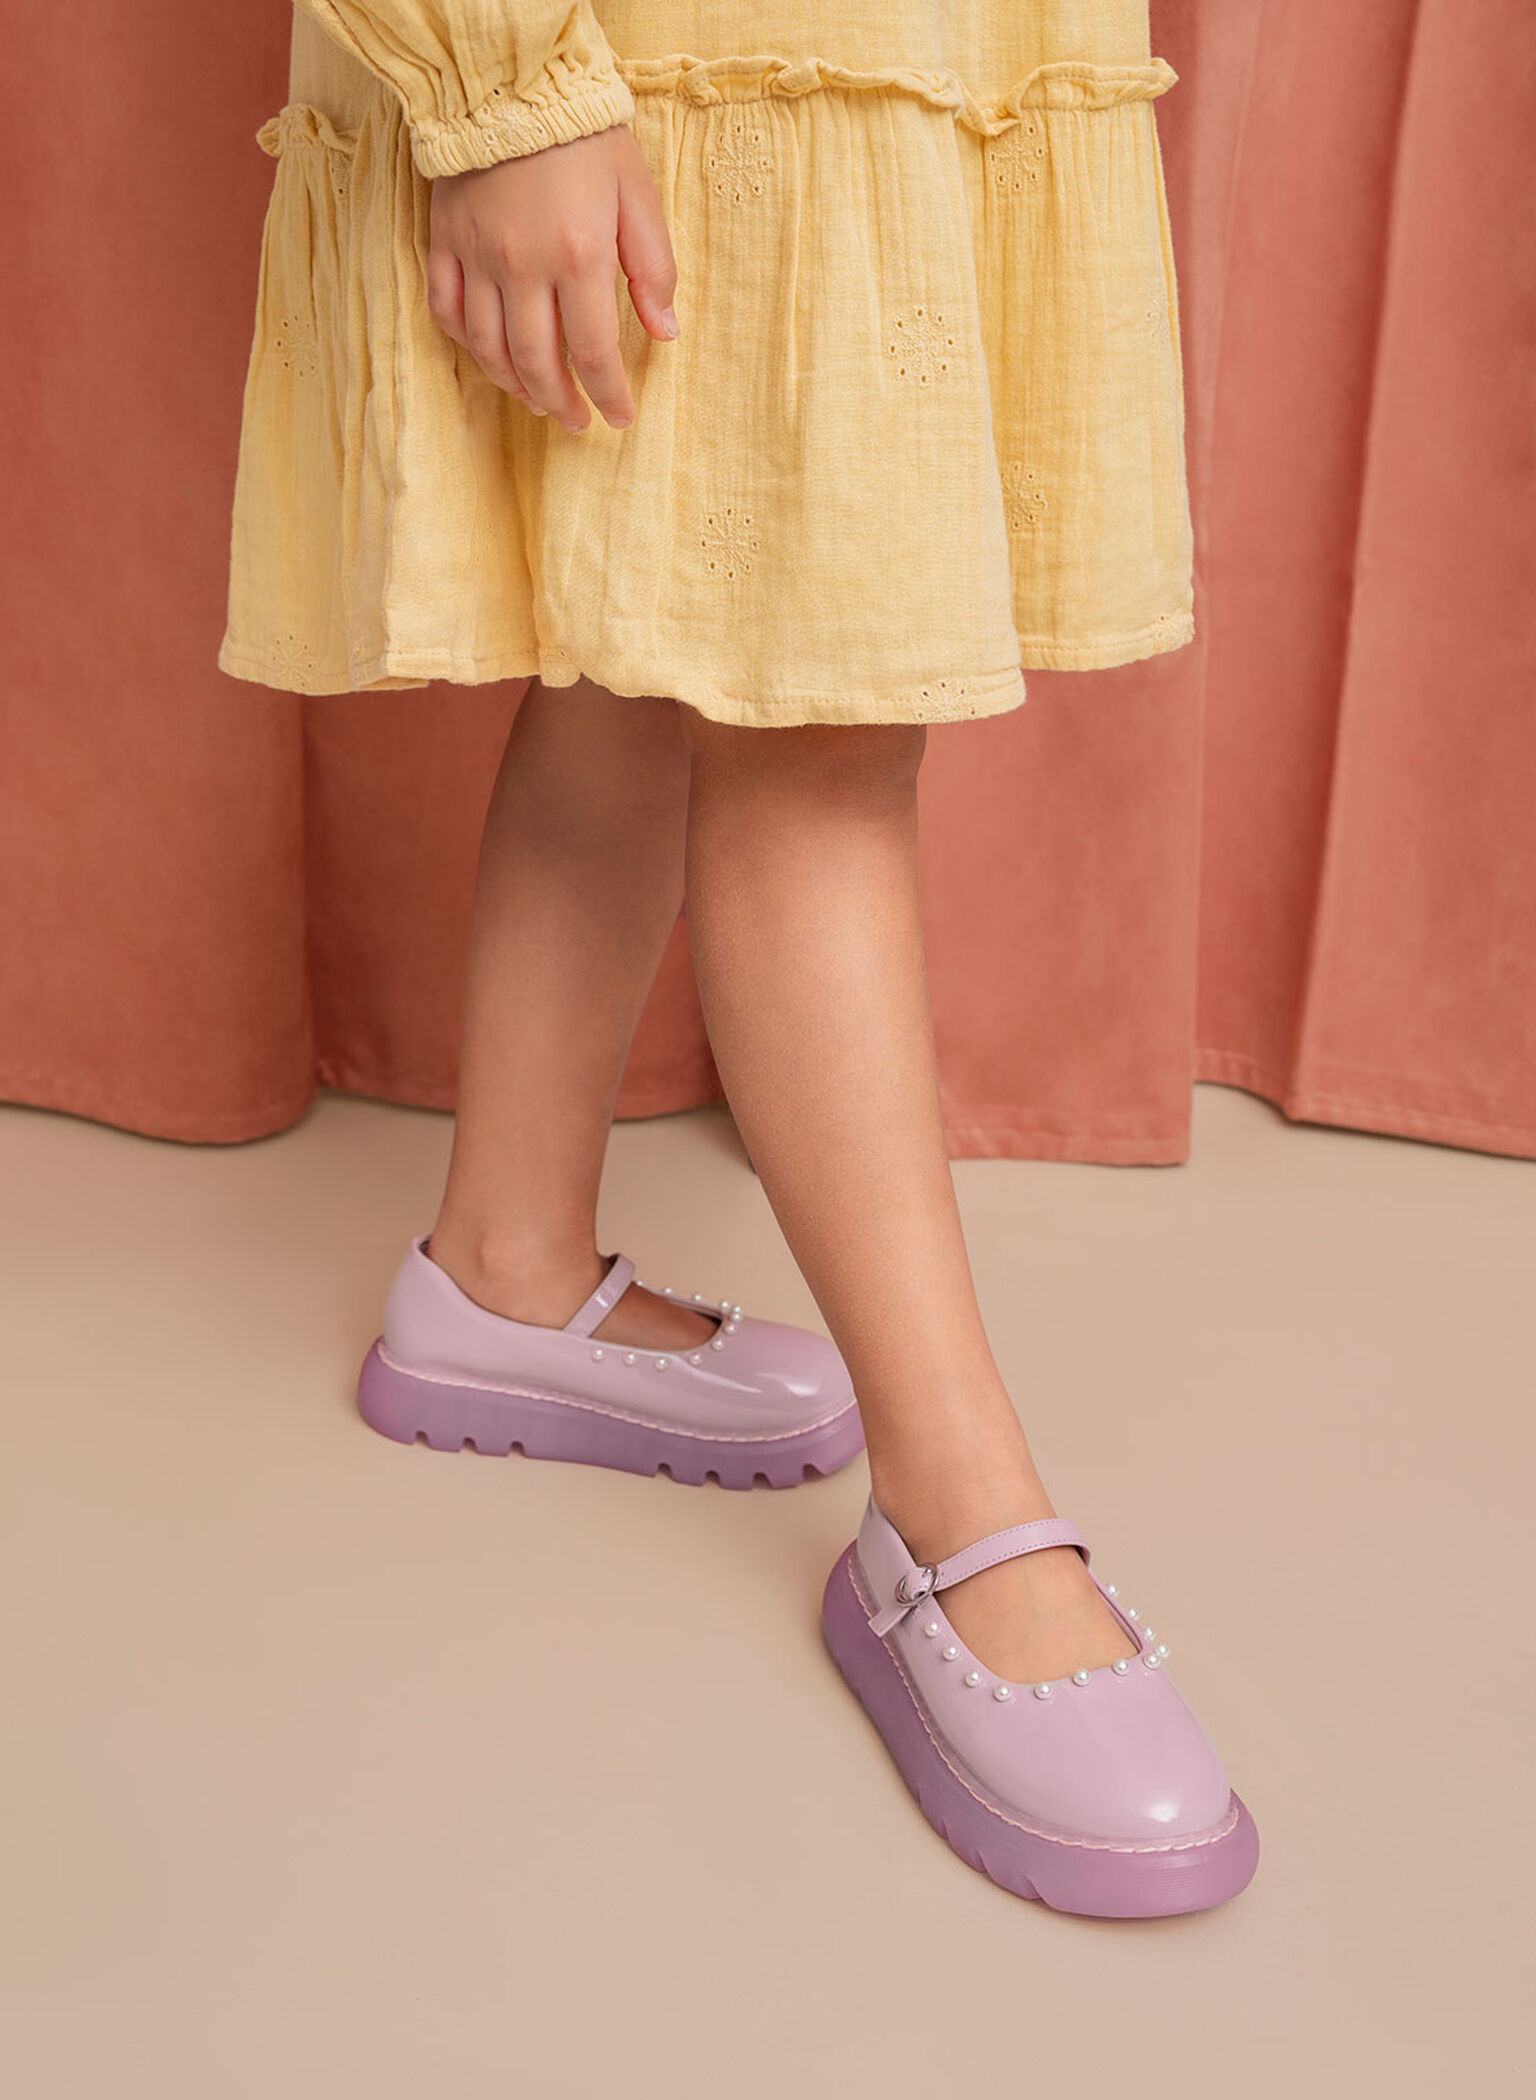 Girls' Bead-Embellished Patent Mary Janes, Lilac, hi-res